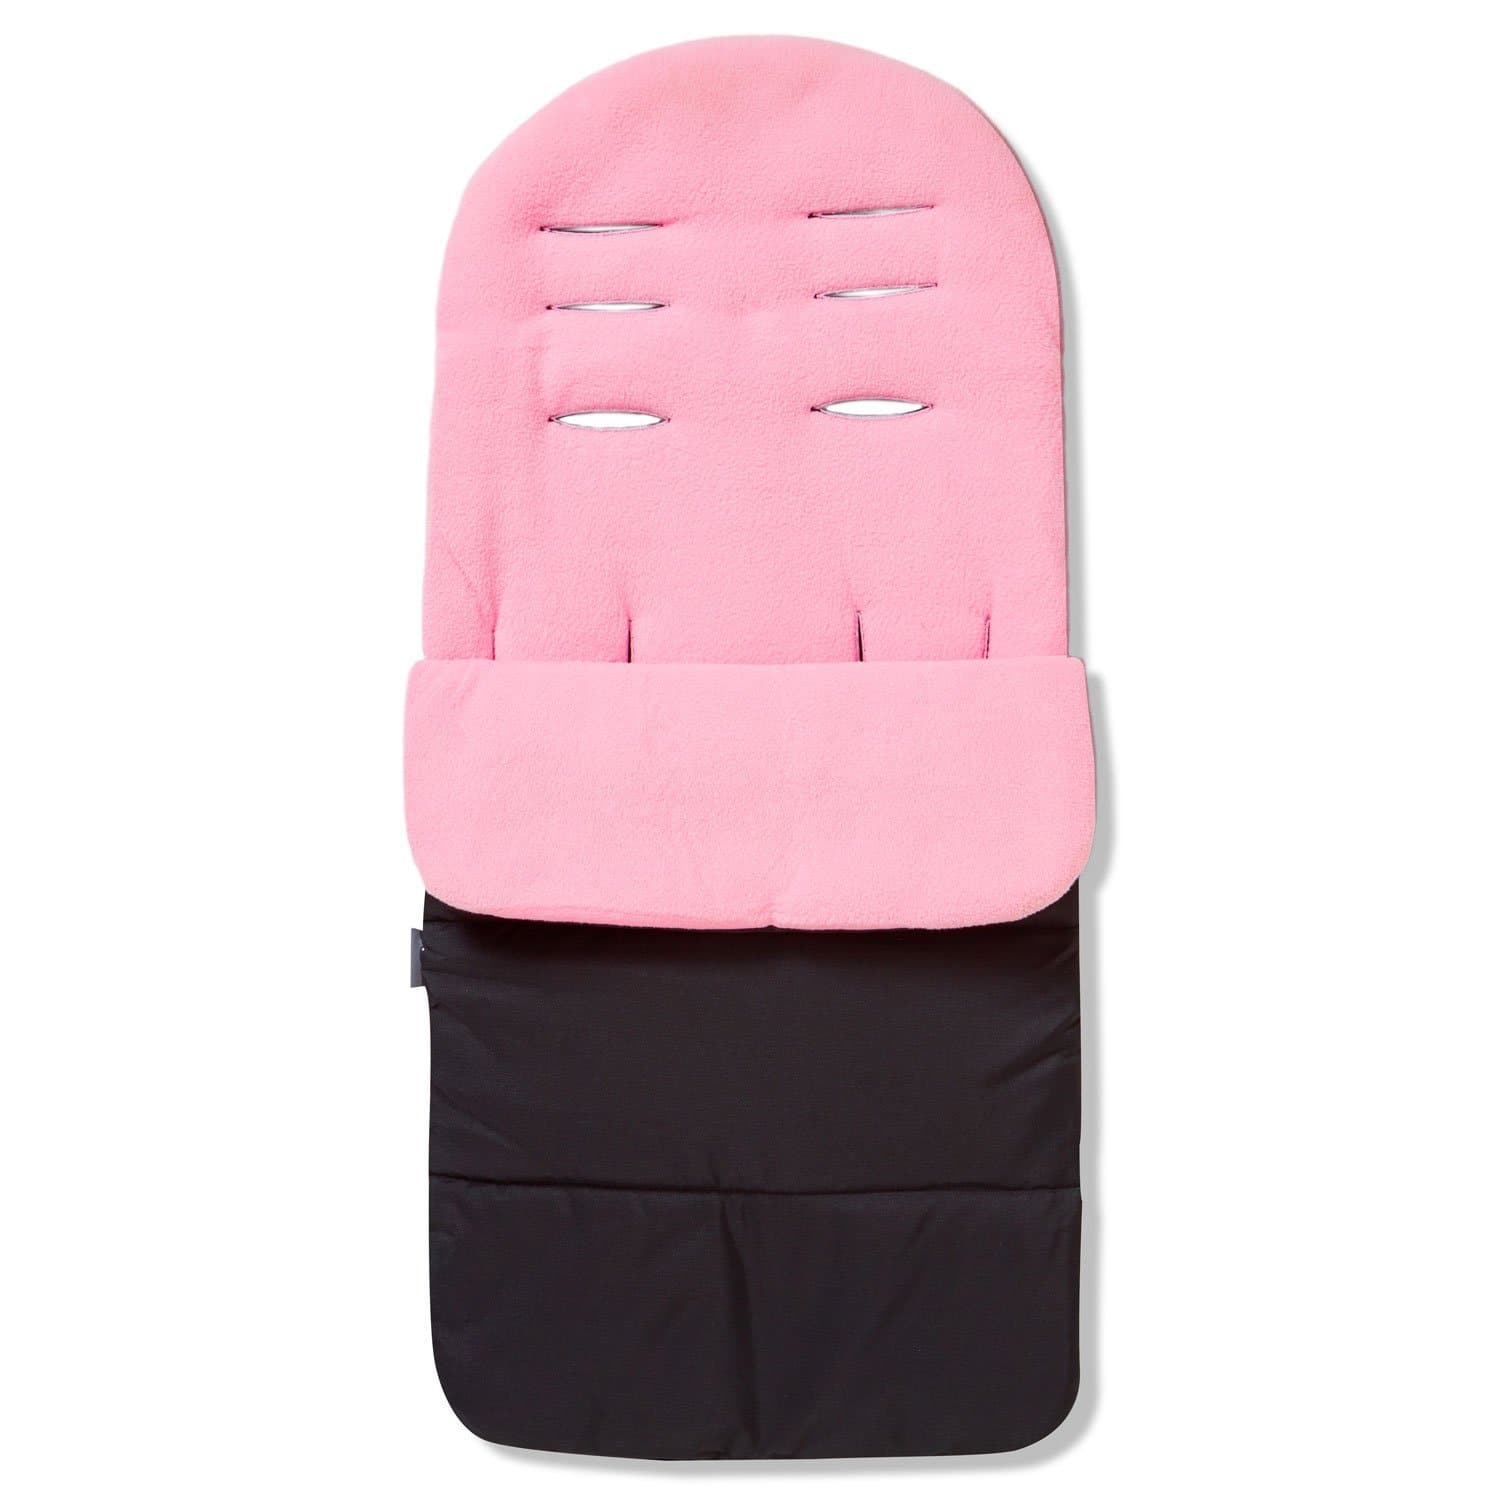 Premium Footmuff / Cosy Toes Compatible with Quax - Candy Pink / Fits All Models | For Your Little One